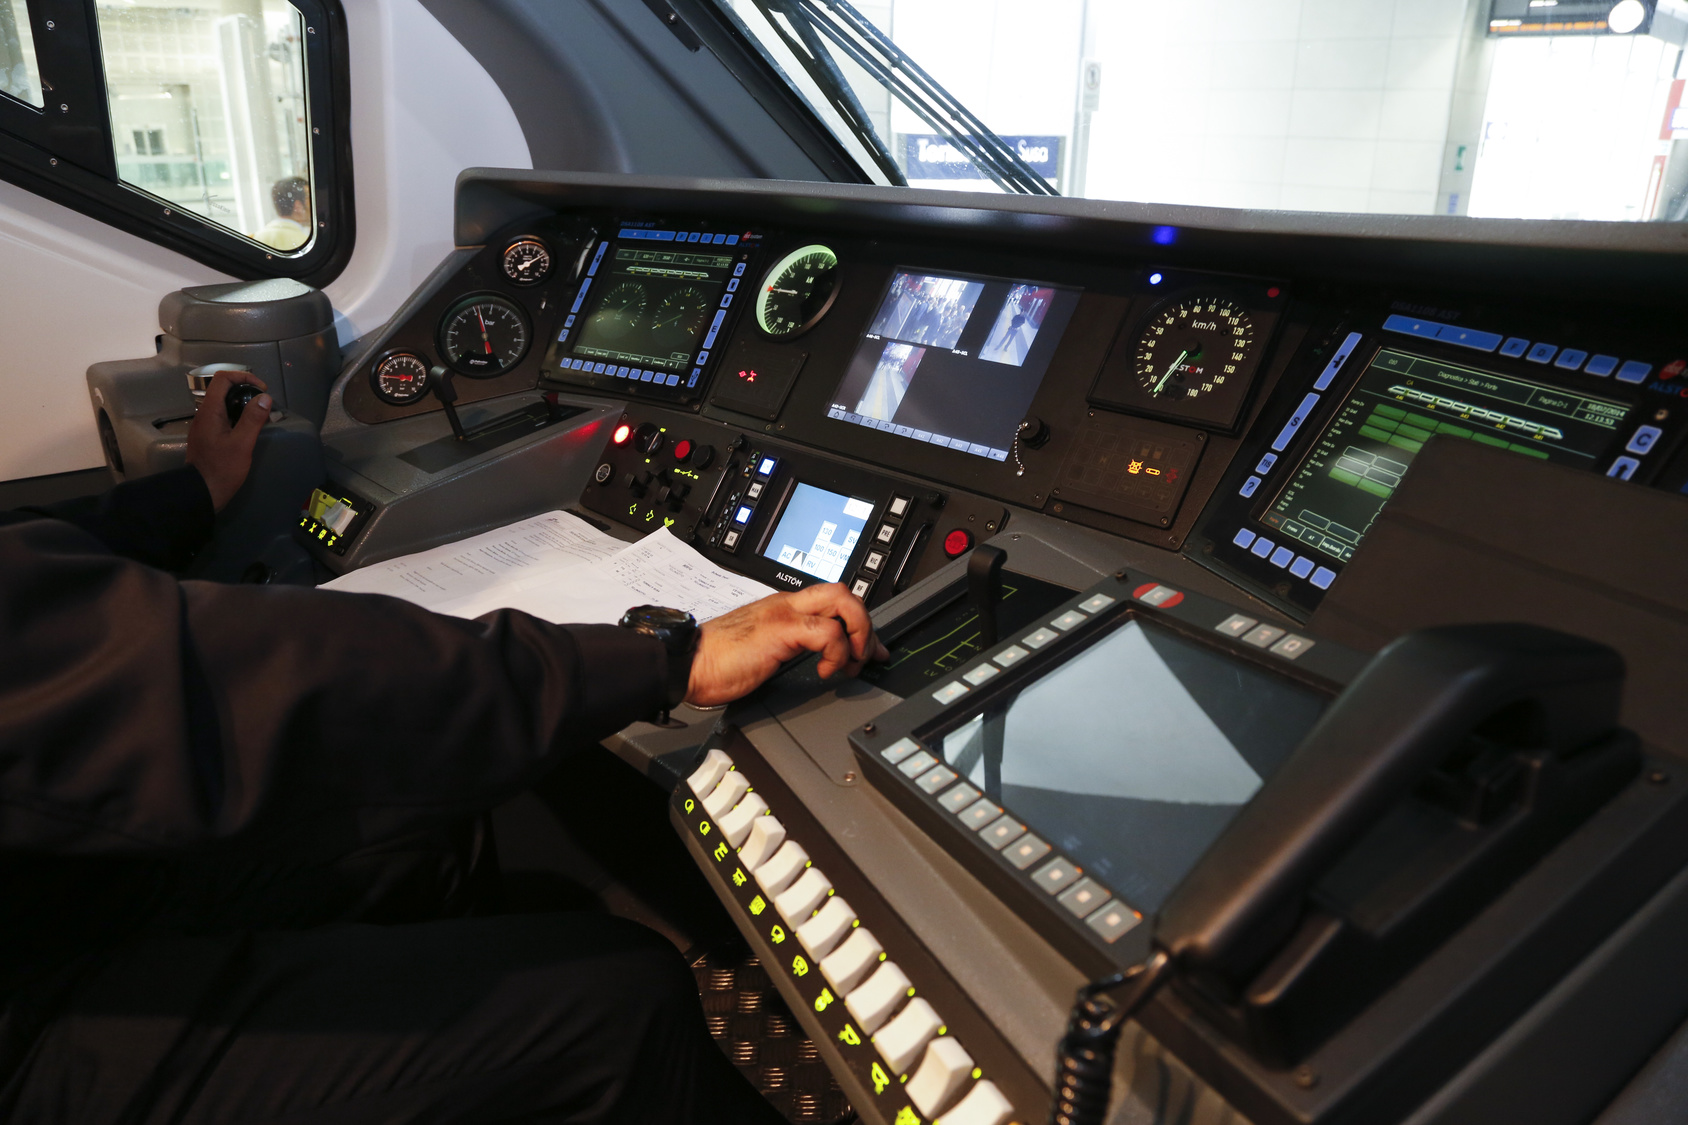 the train driver selection tests require the utmost concentration